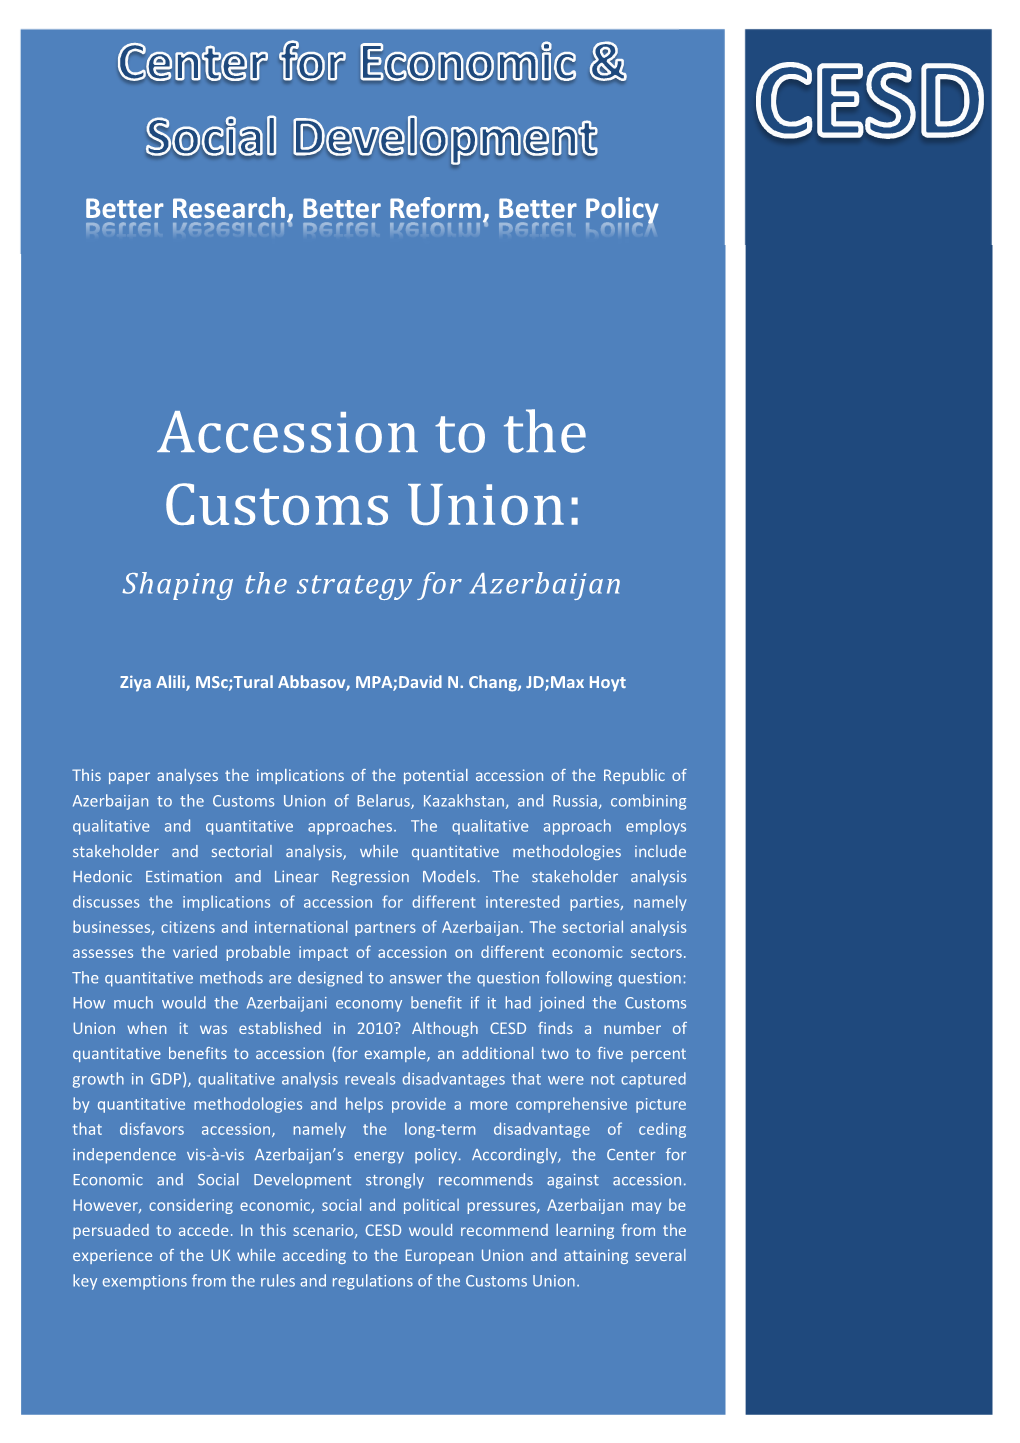 Accession to the Customs Union